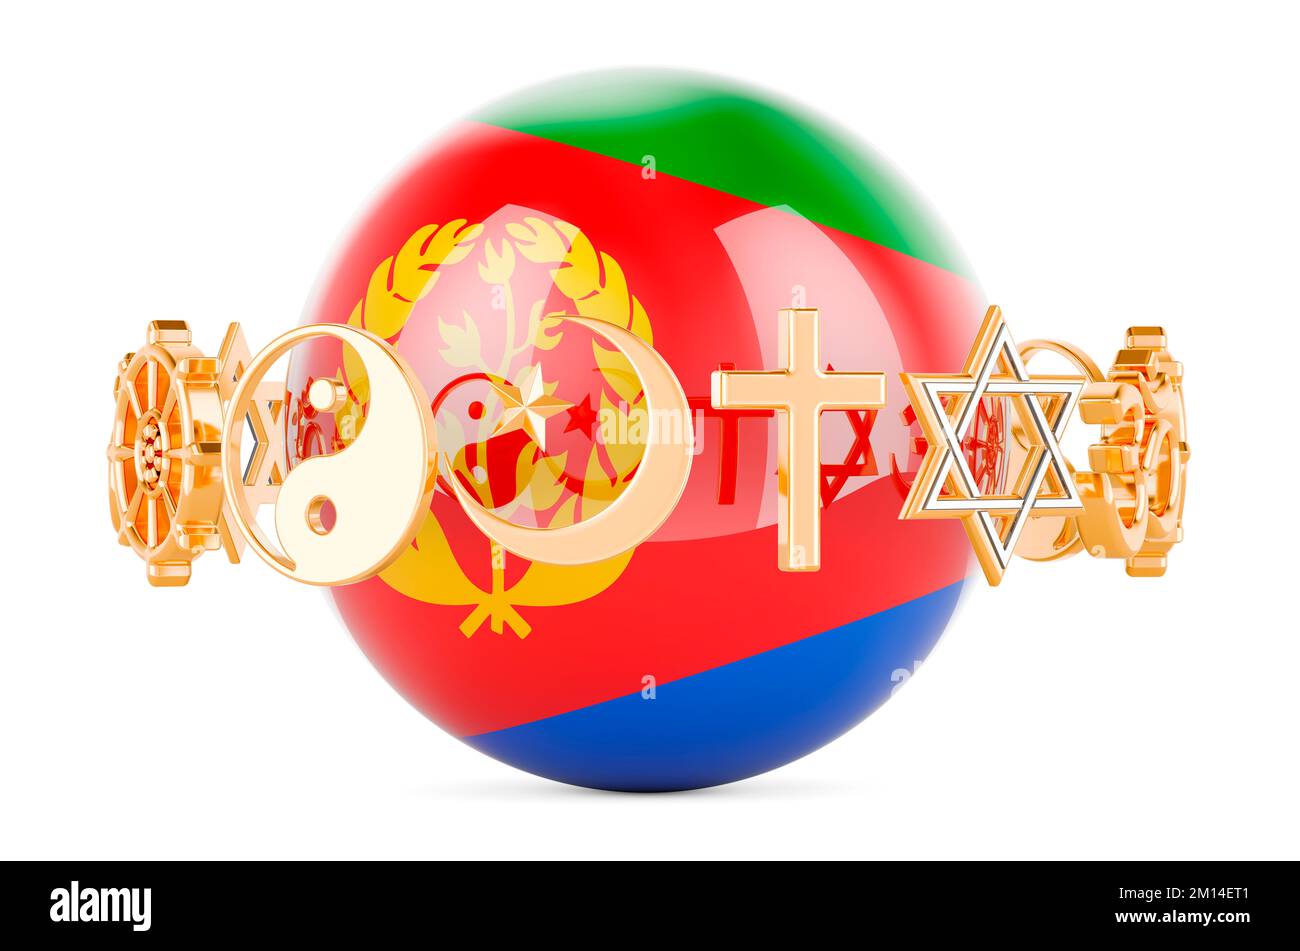 Eritrean flag painted on sphere with religions symbols around, 3D rendering isolated on white background Stock Photo